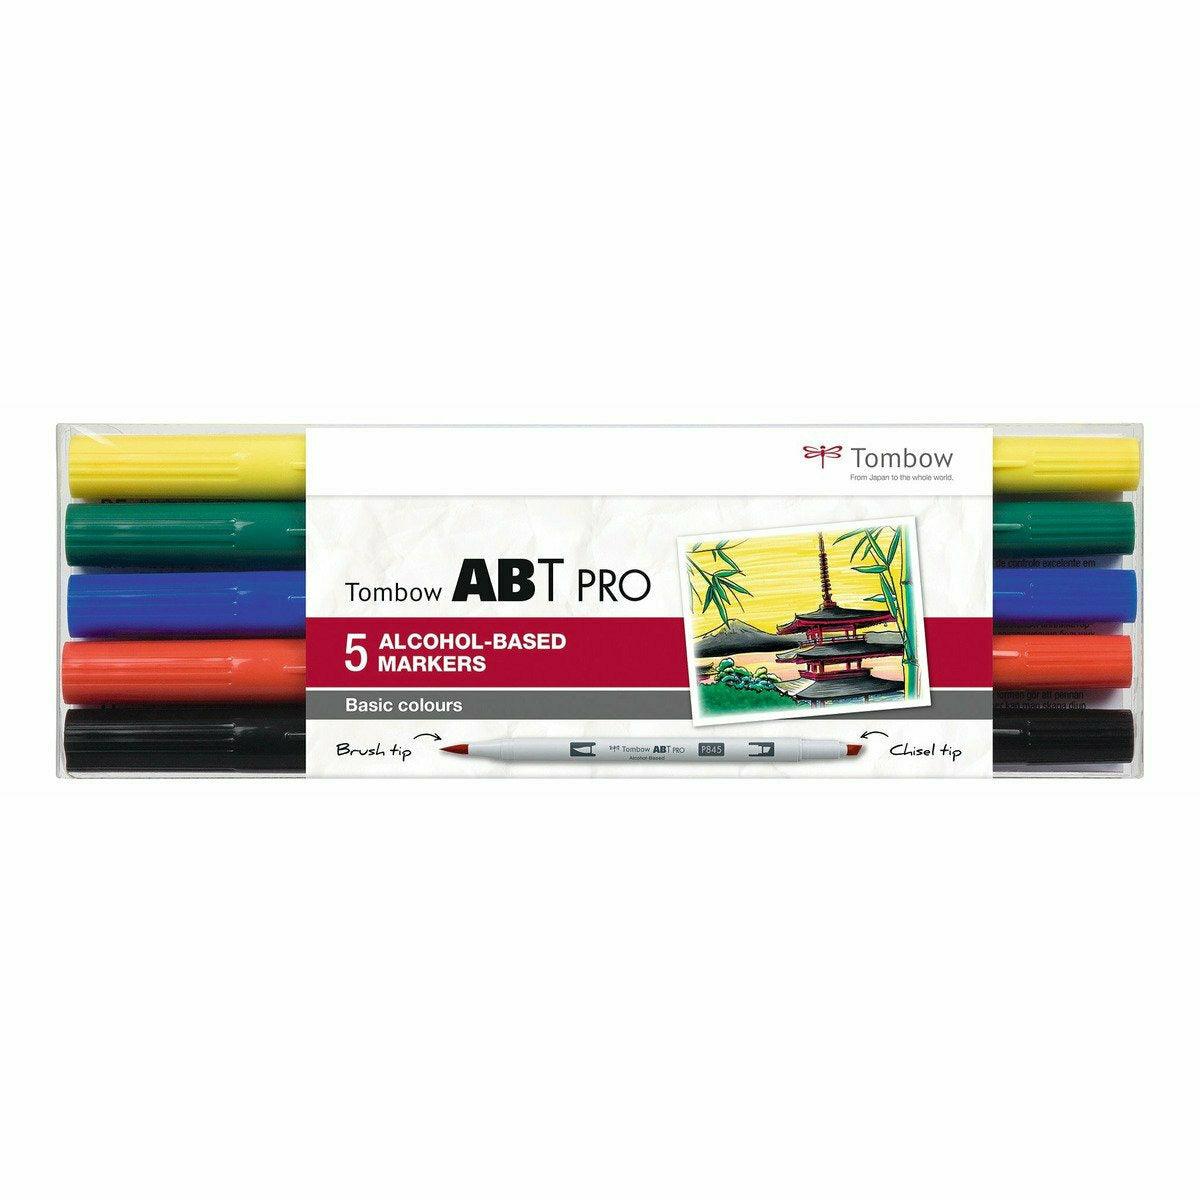 Tombow ABT PRO, Basic Colours, 5Stk. im Outlet Sale